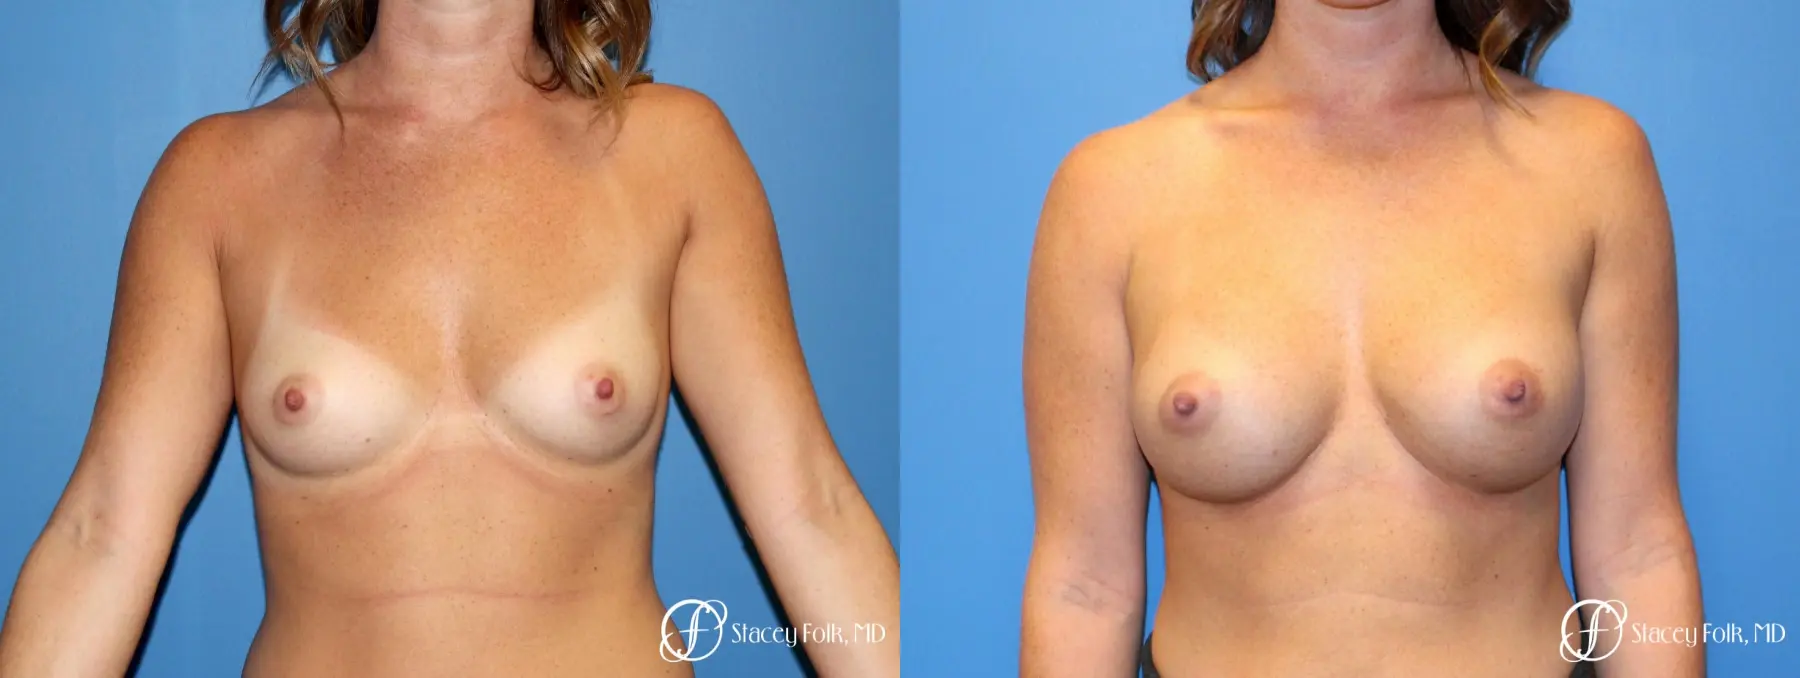 Denver Breast Augmentation using Sientra Silicone Breast Implants 9092 - Before and After 1